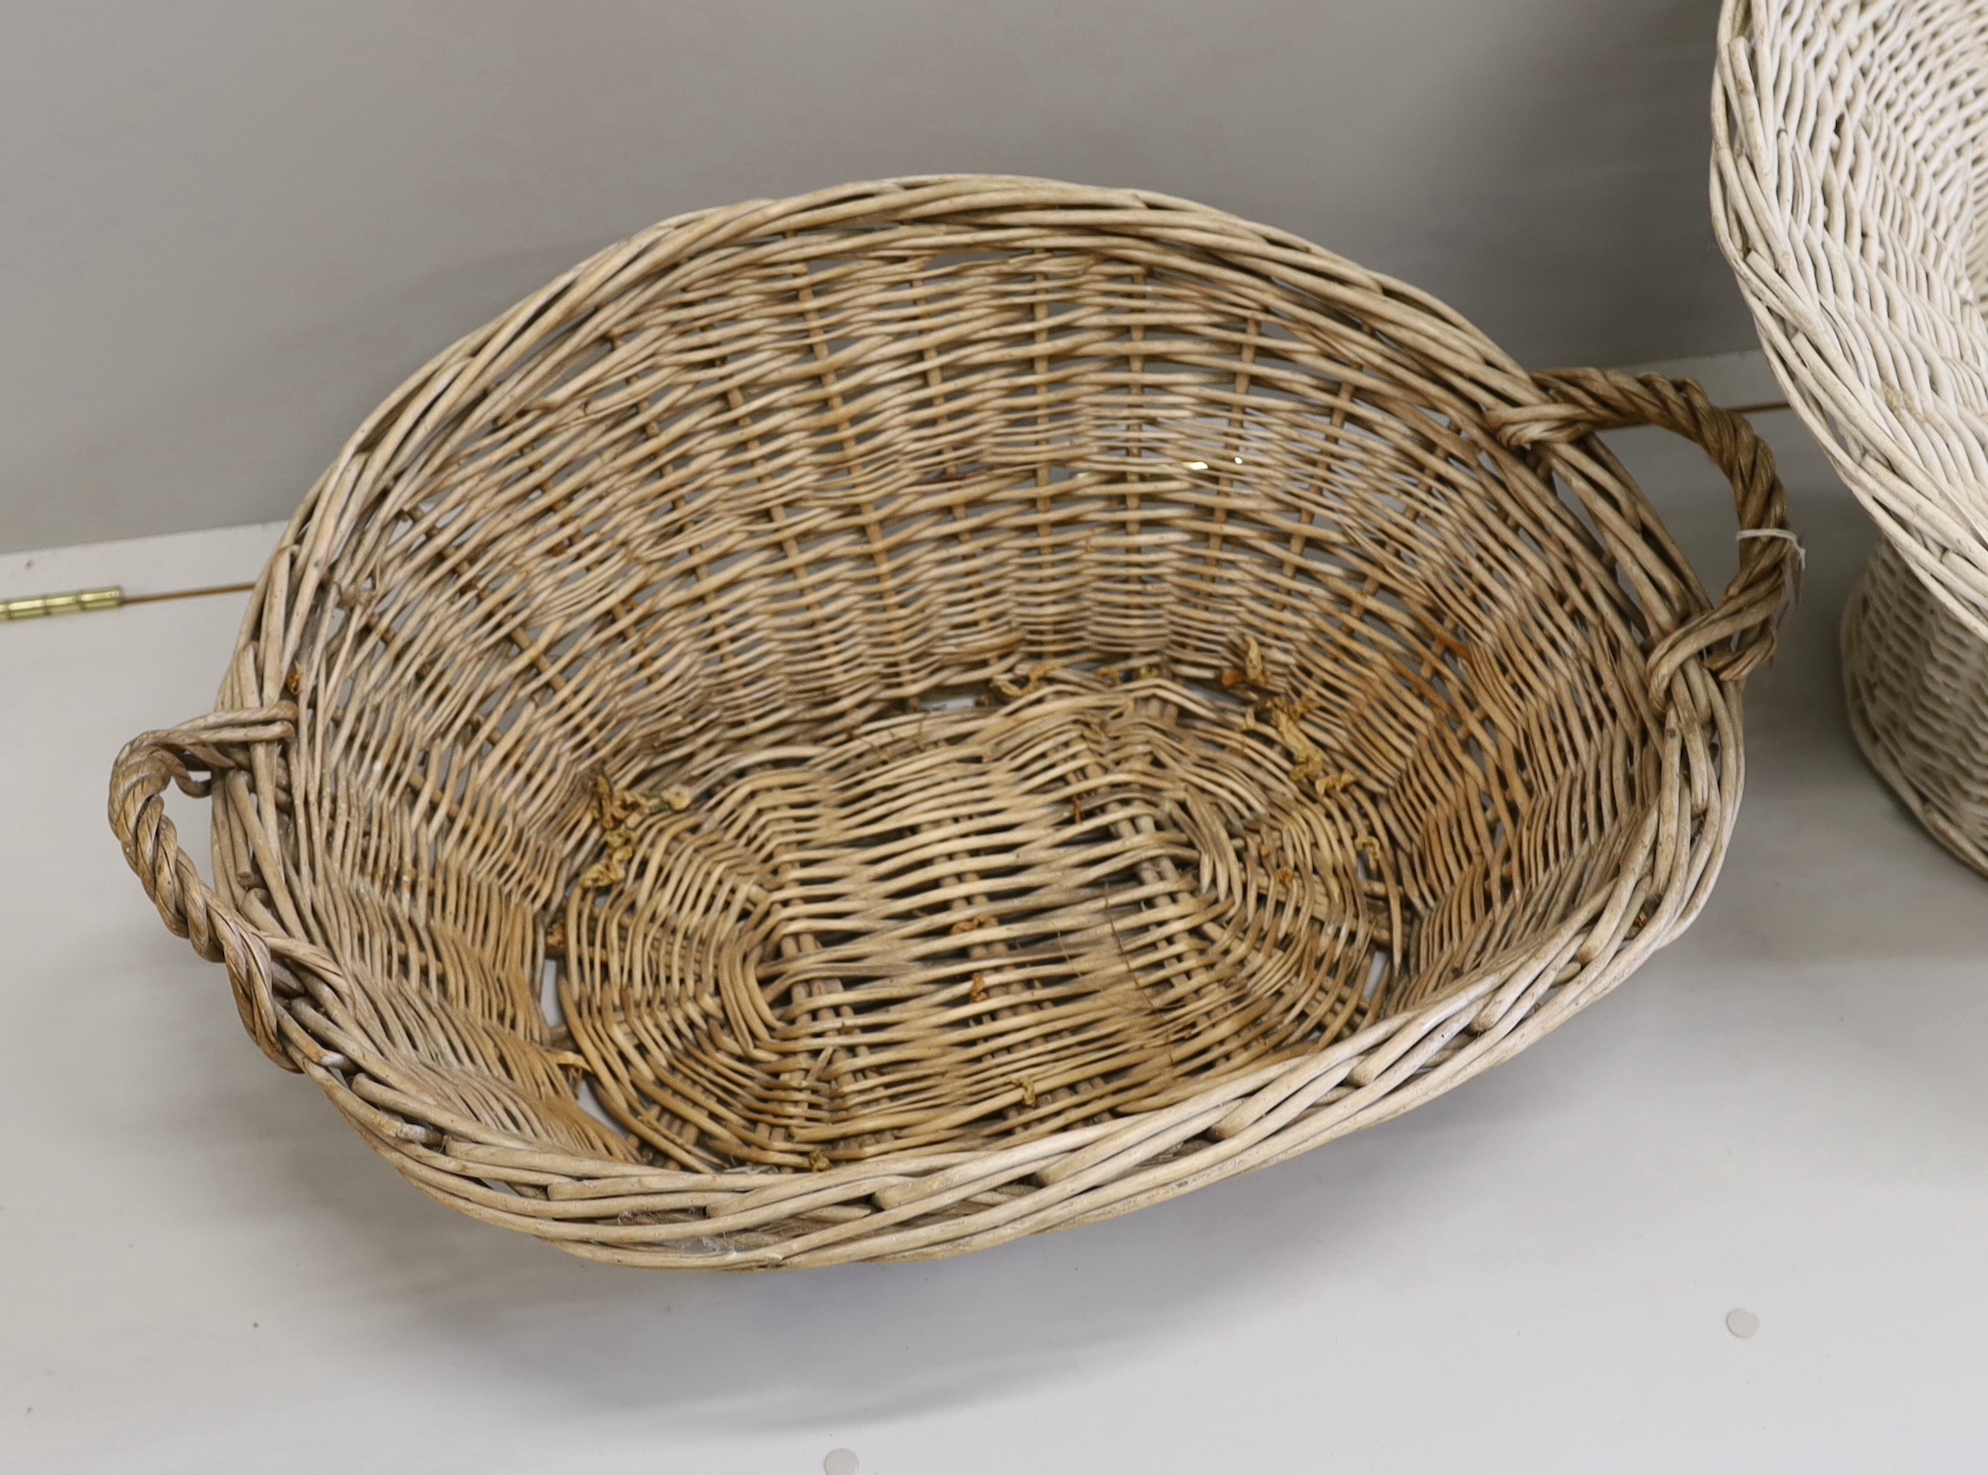 Two large wicker baskets, larger height 86cm